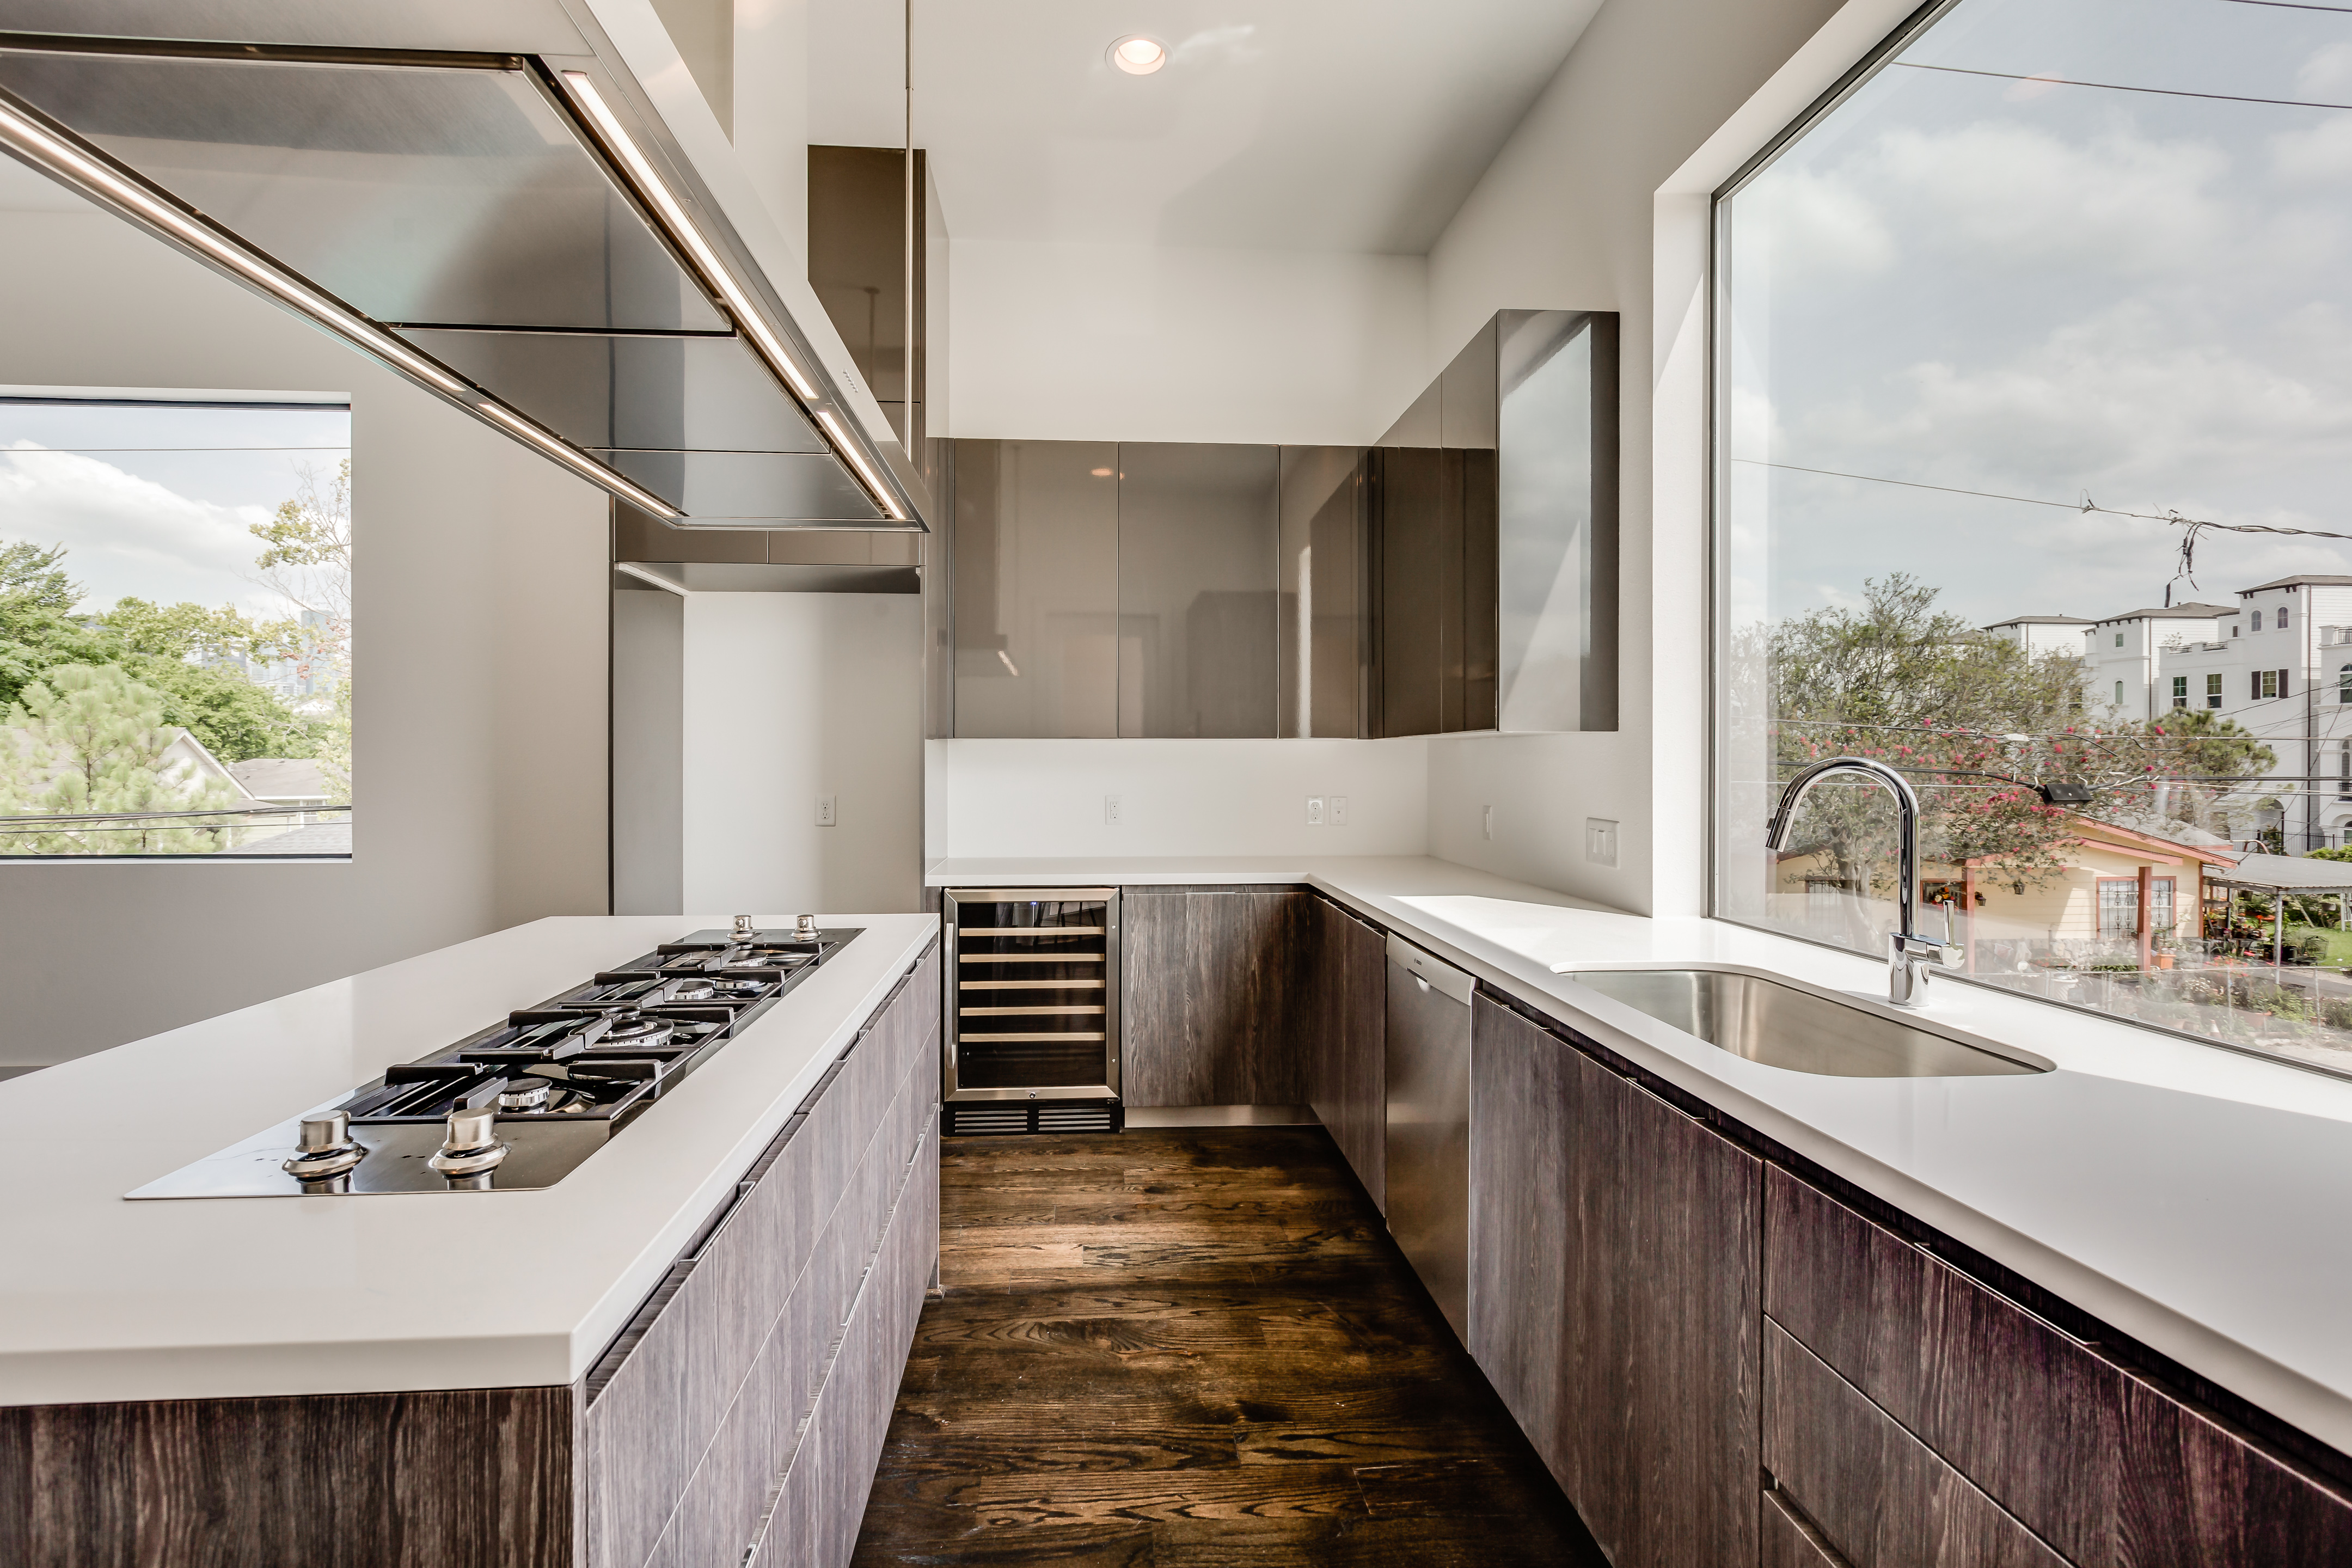 Contemporary Kitchen at our Middle Street Lofts on The Bayou Townhomes in Houston, TX